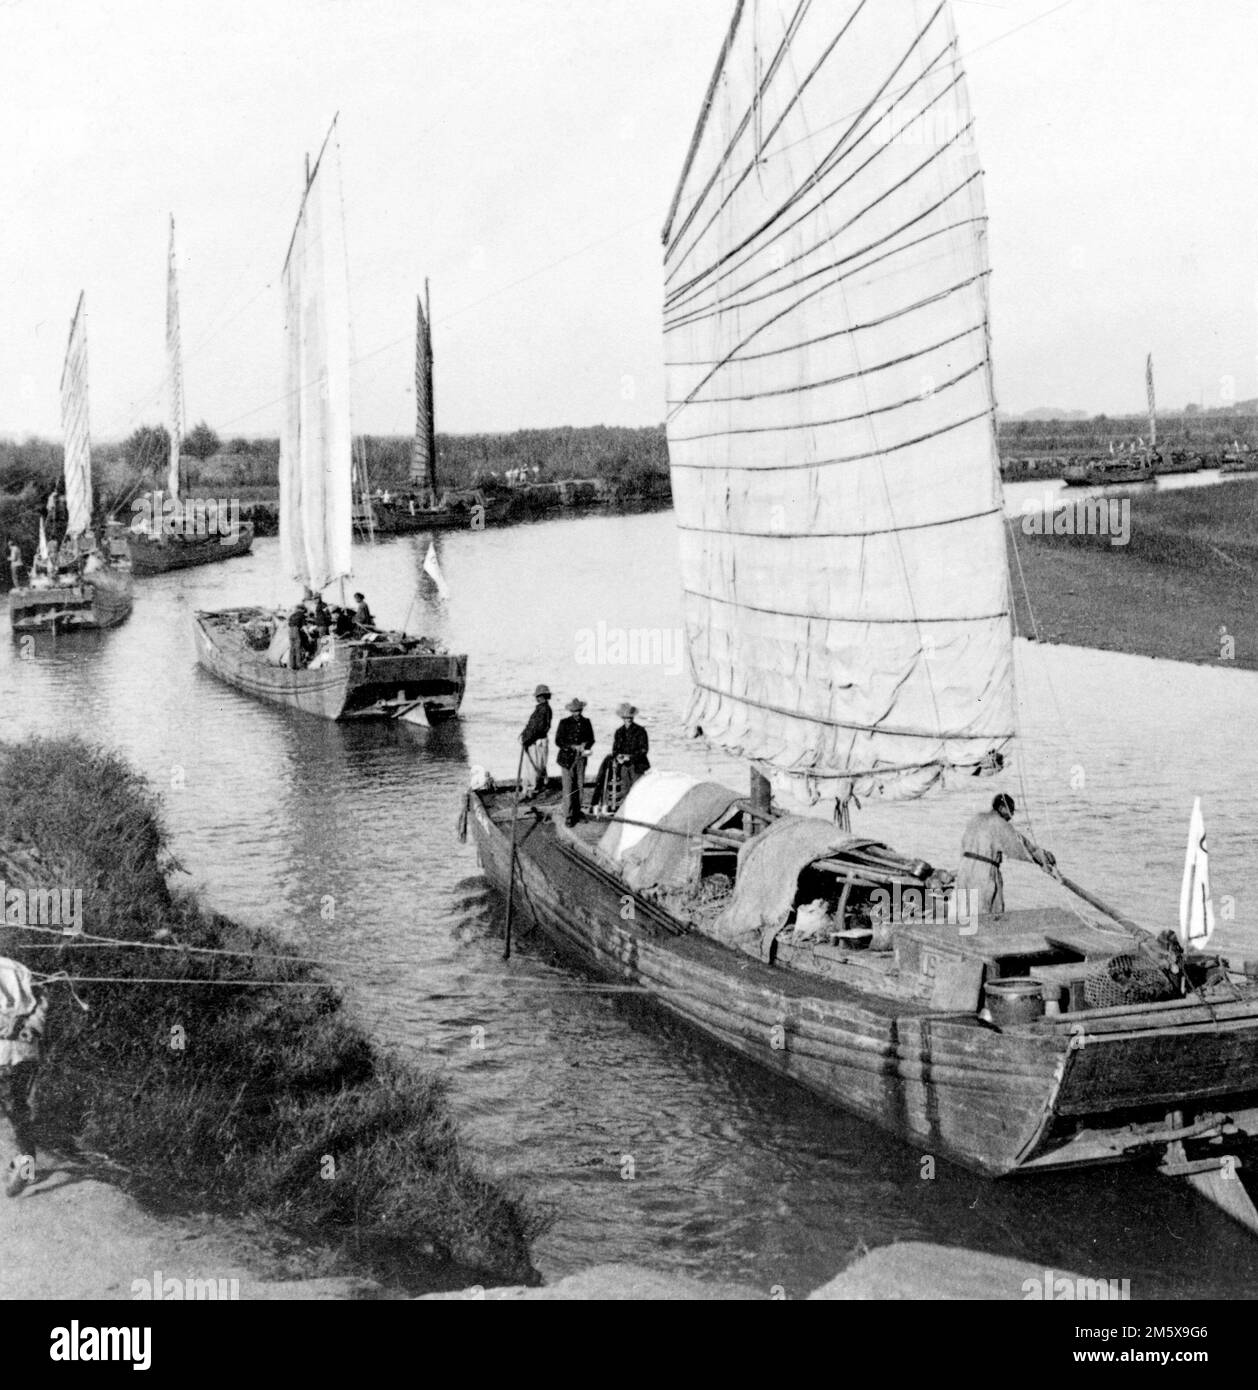 Boxer Rebellion. Junk flotilla on the Peiho River - transporting U.S. Army stores from Tientsin to Peking, China. Photo by Underwood and Underwood, 1900 Stock Photo